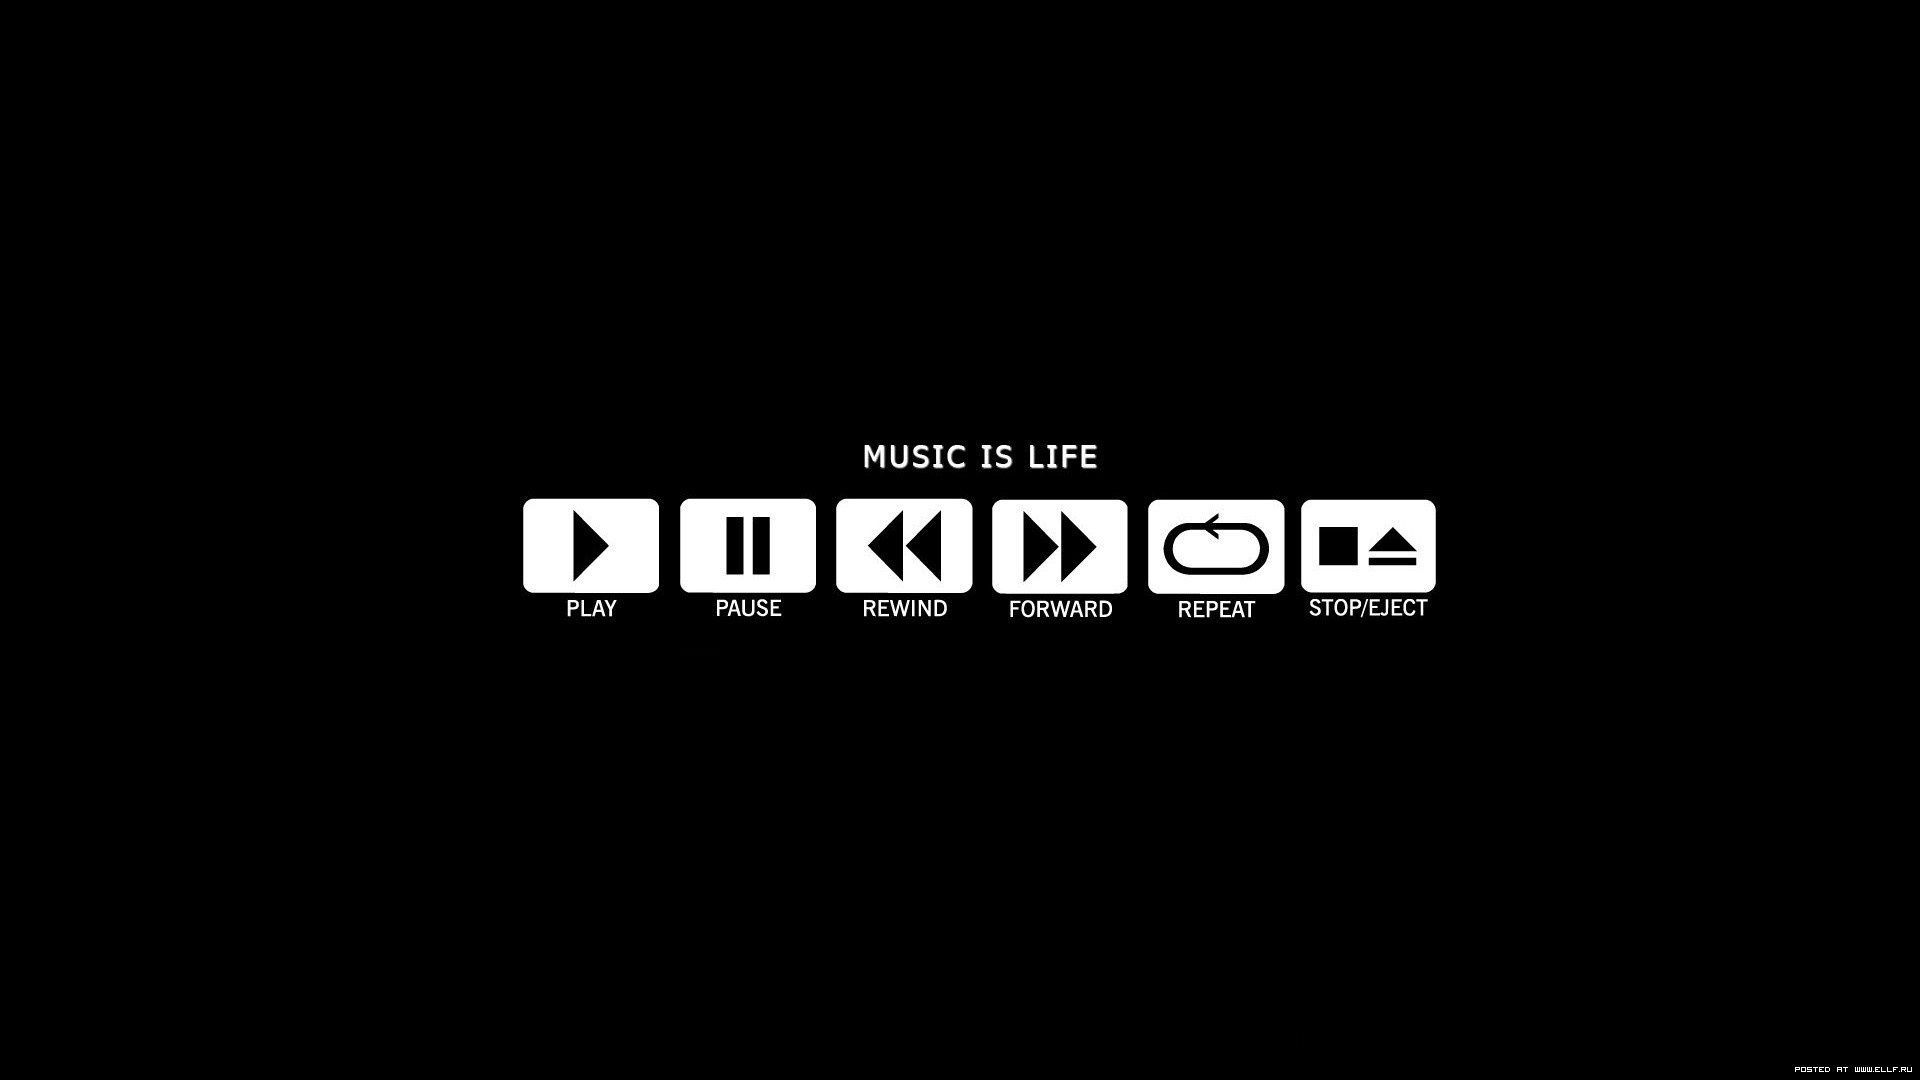 Music Is Life Wallpaper. Facebook cover image, Facebook cover